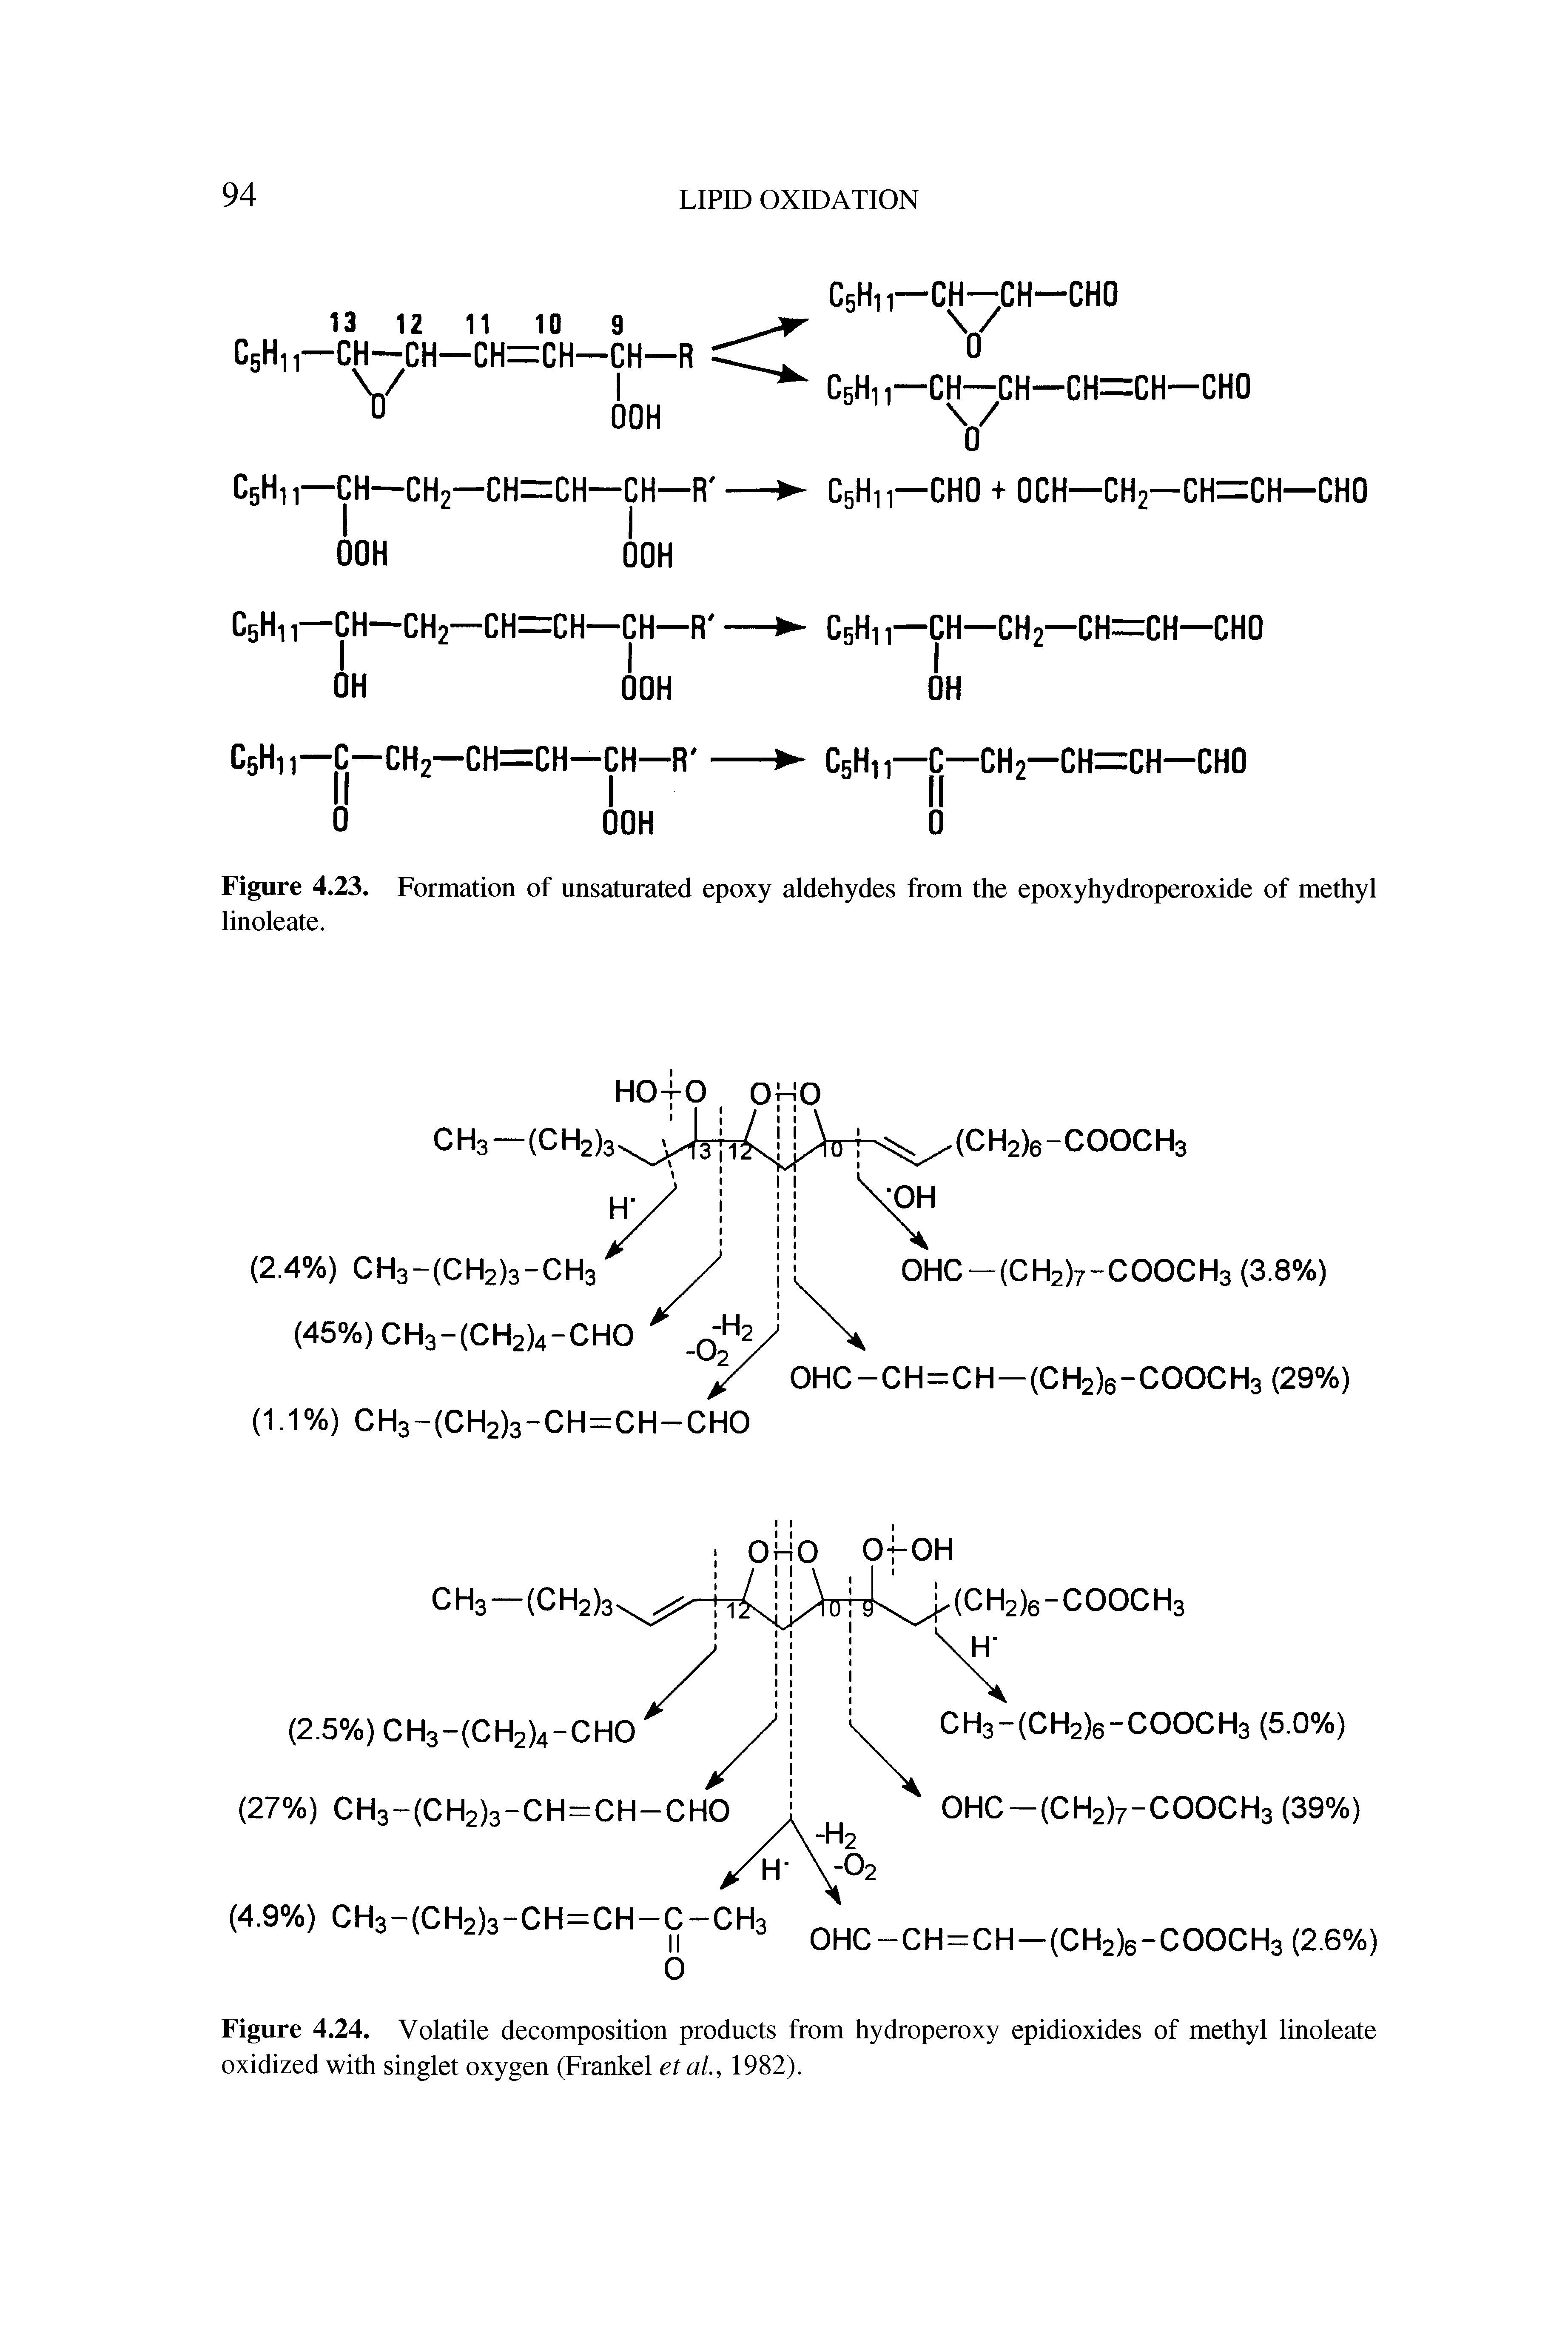 Figure 4.24. Volatile decomposition products from hydroperoxy epidioxides of methyl linoleate oxidized with singlet oxygen (Frankel etal, 1982).